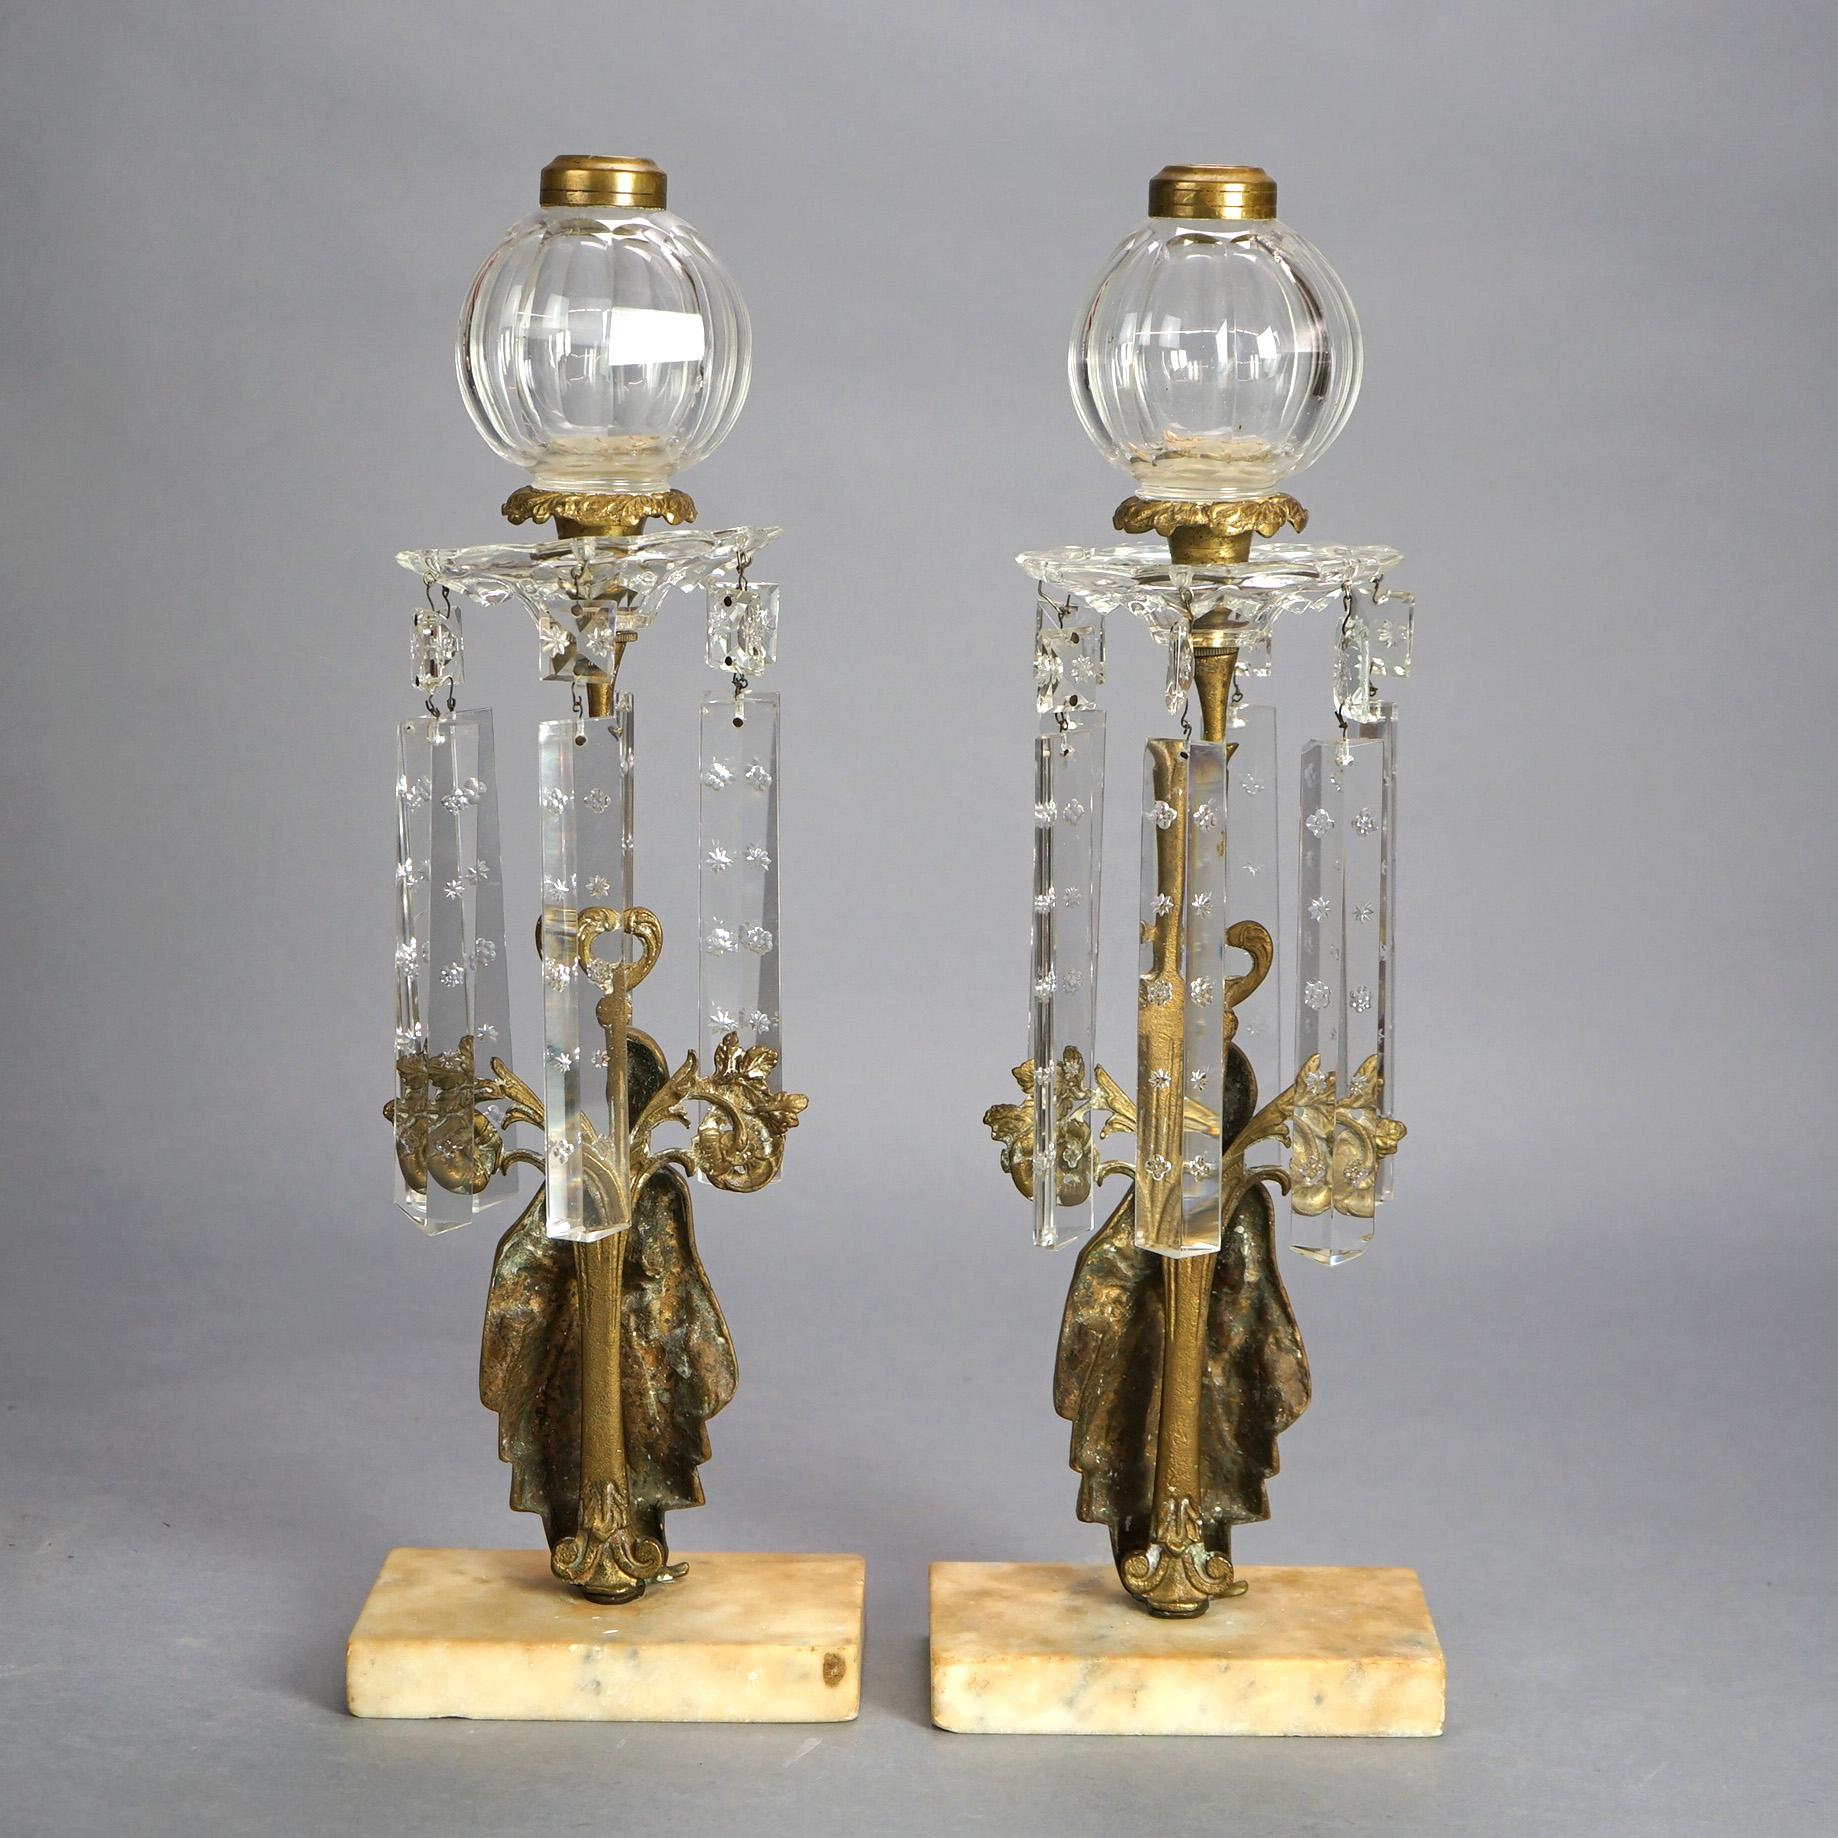 Antique Pair Figural Girandole Sultana Design Oil Lamps with Crystals C1880 For Sale 2